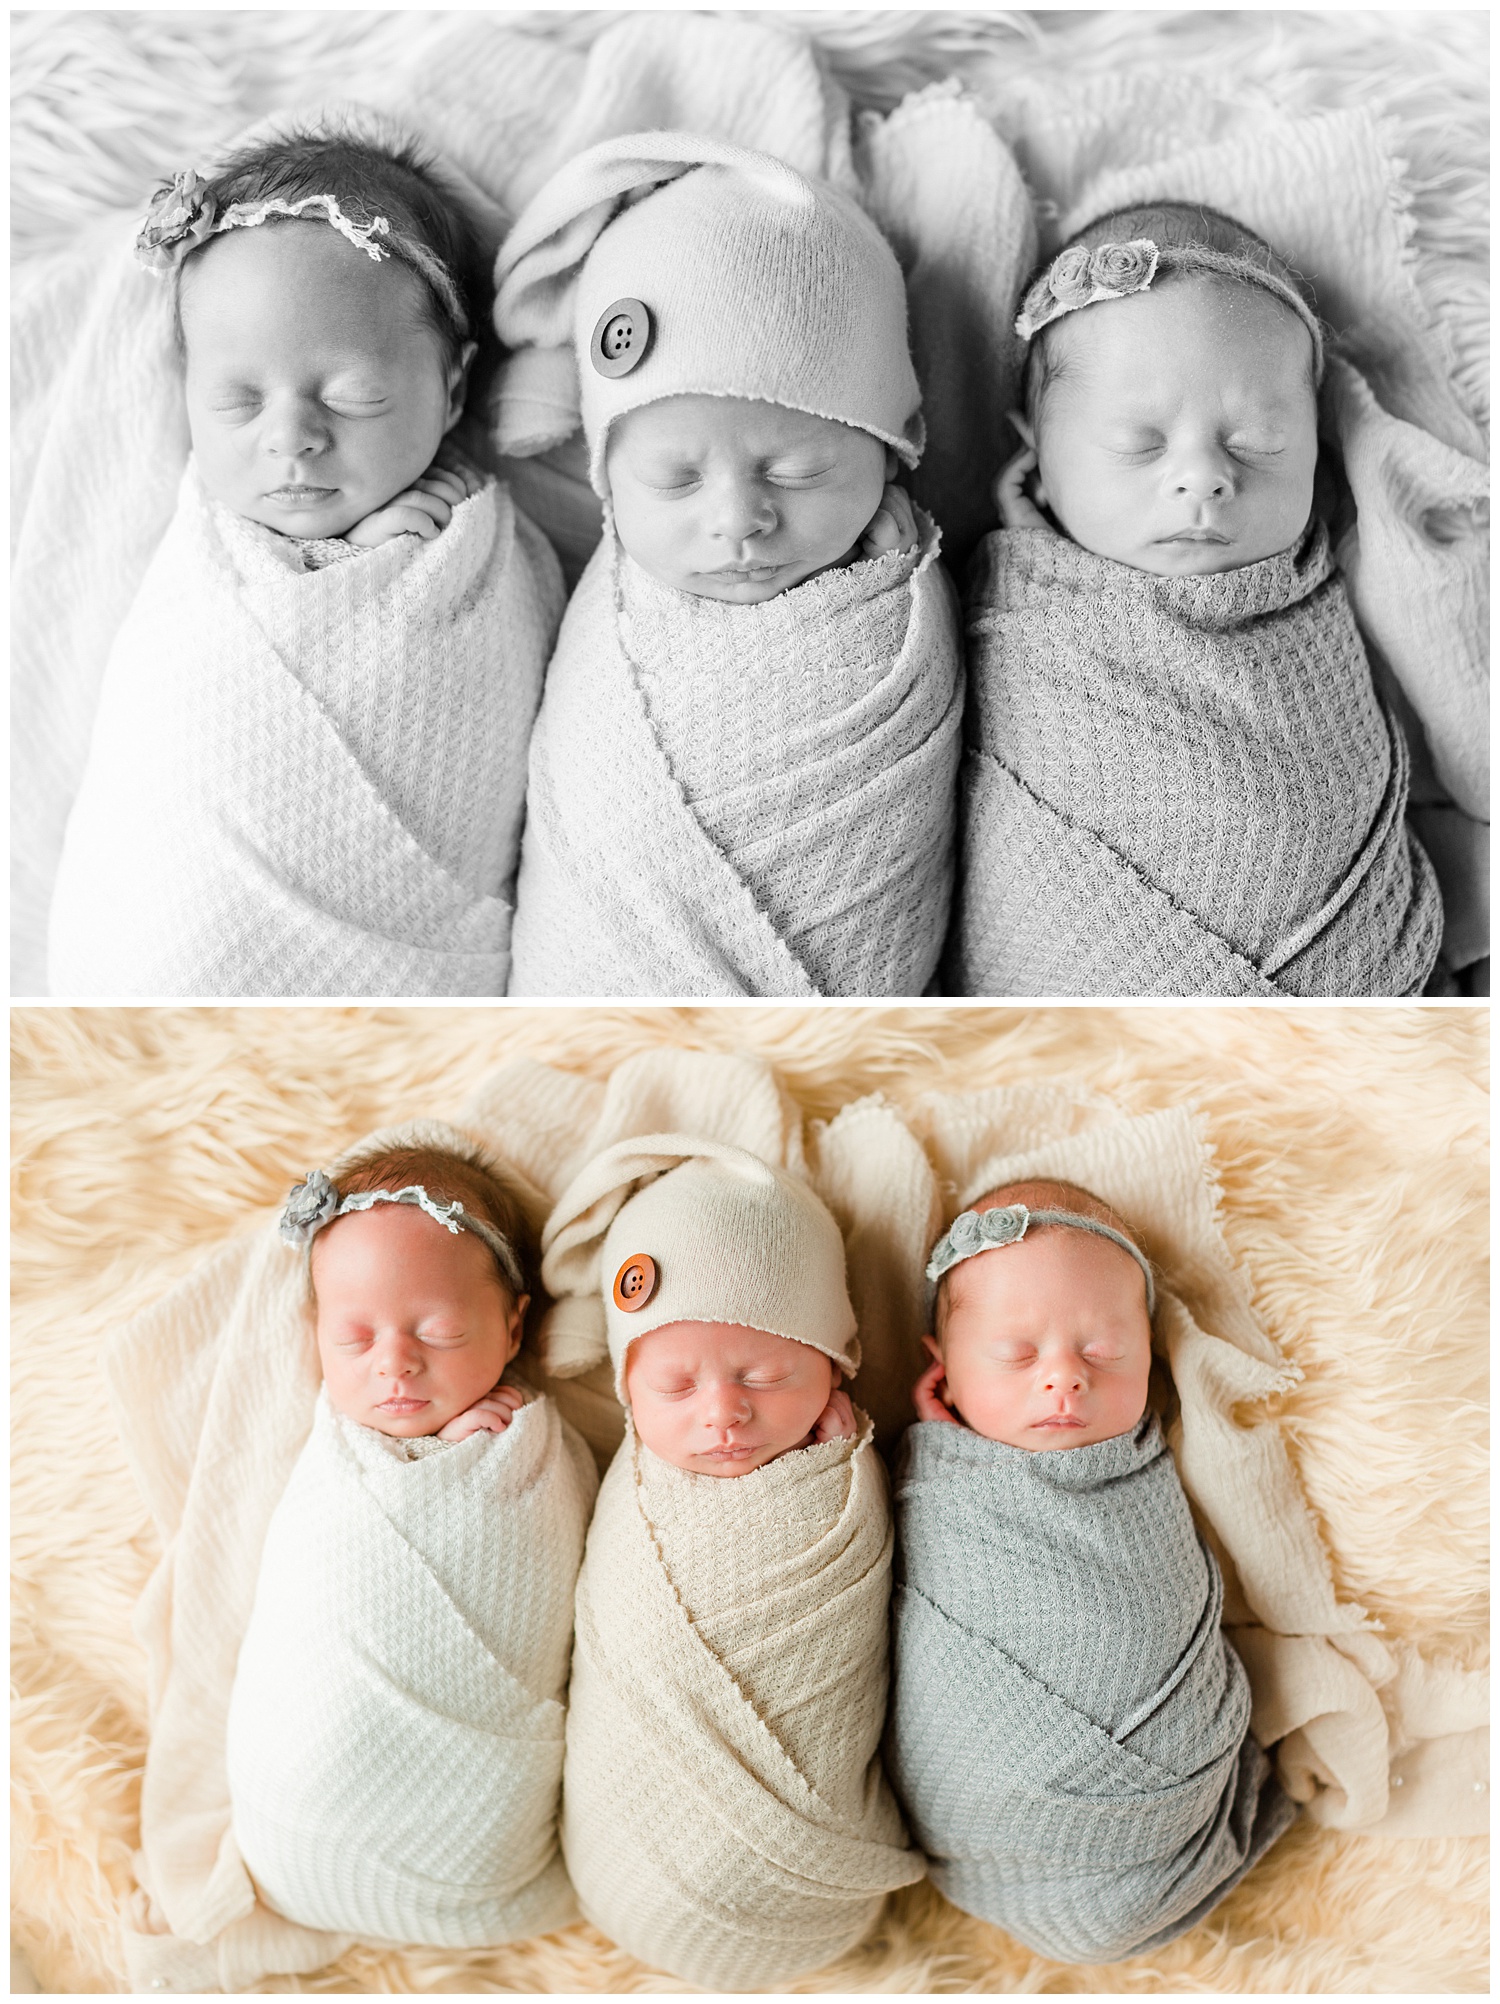 Triplet newborns Emery, Turner and Lydia snuggled together wrapped up in neutral colors | CB Studio